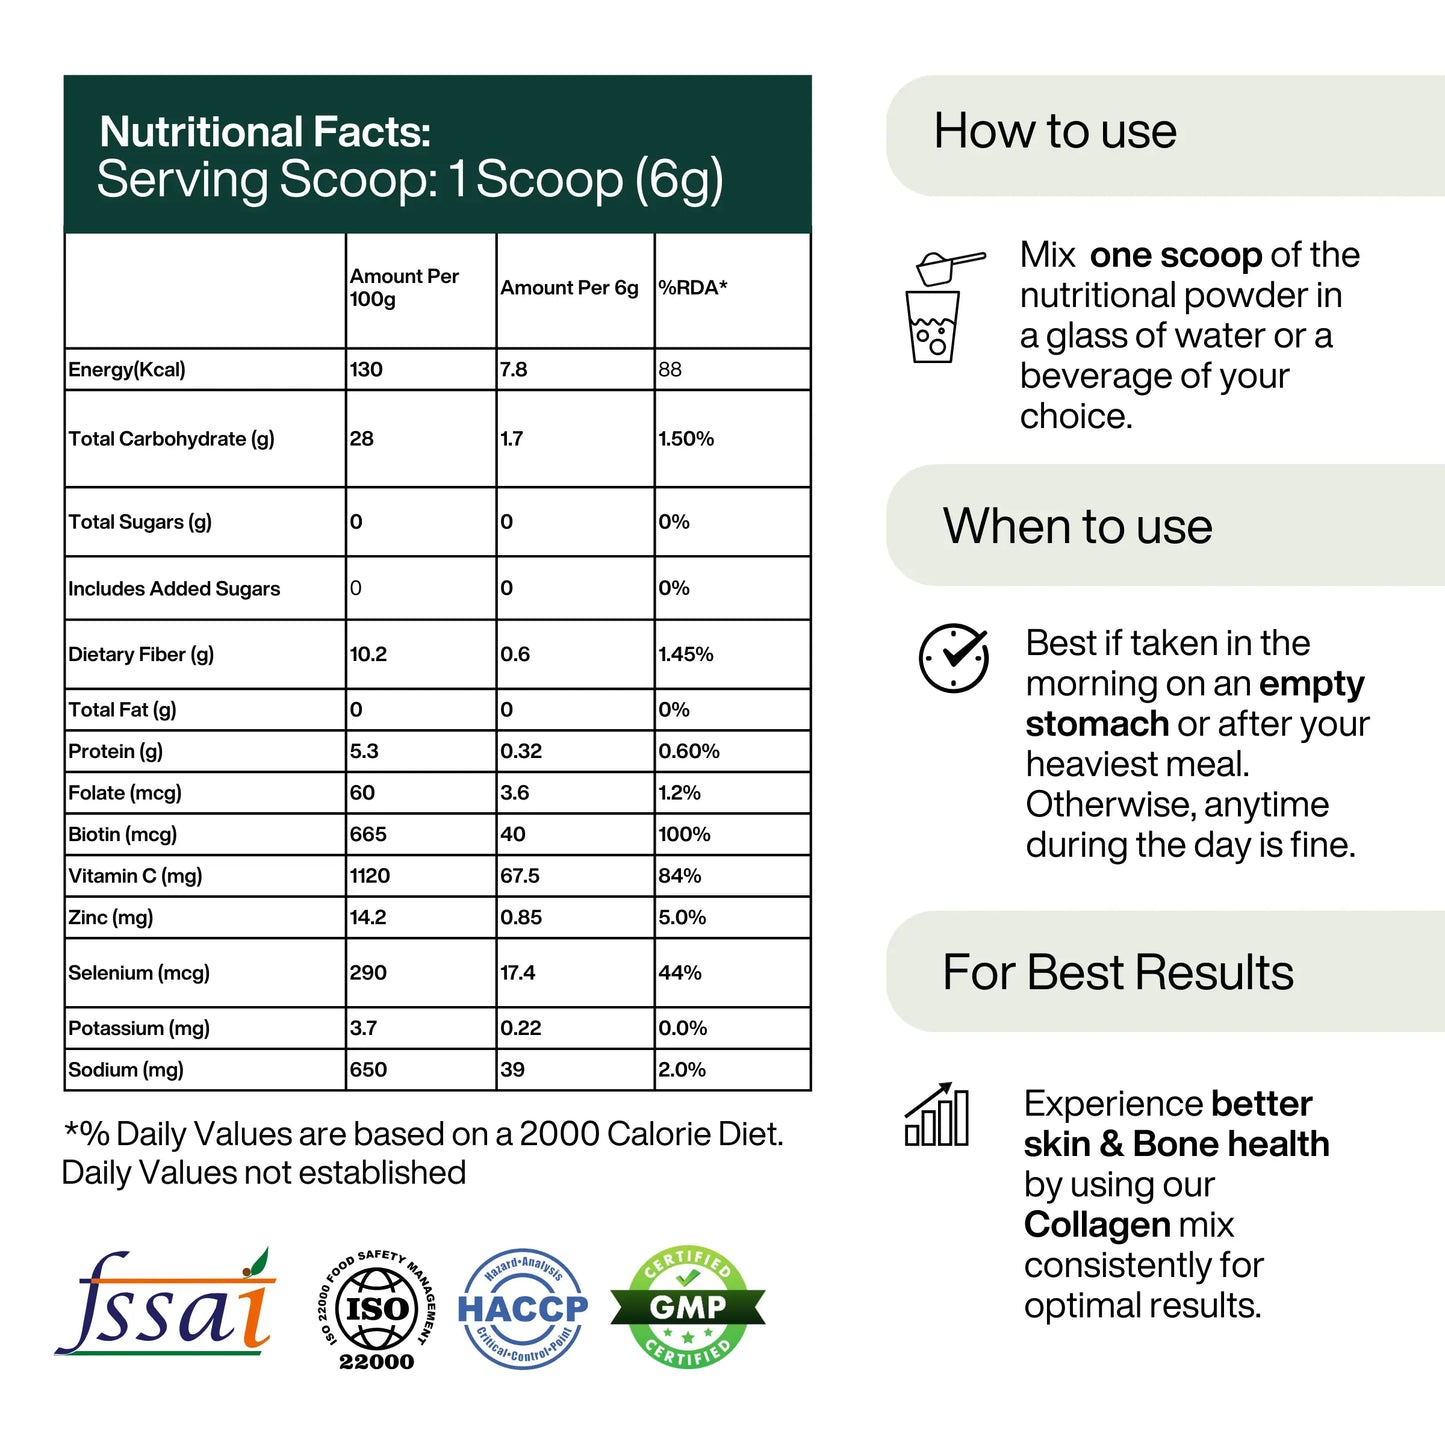 Picture of Puretive's Daily Collagen Nutrition Mix's Nutritional Facts, How to use, When to use & How to get the Best Resuts. Also Certifications like FSSAI, ISO, HACCP & GMP are mentioned.